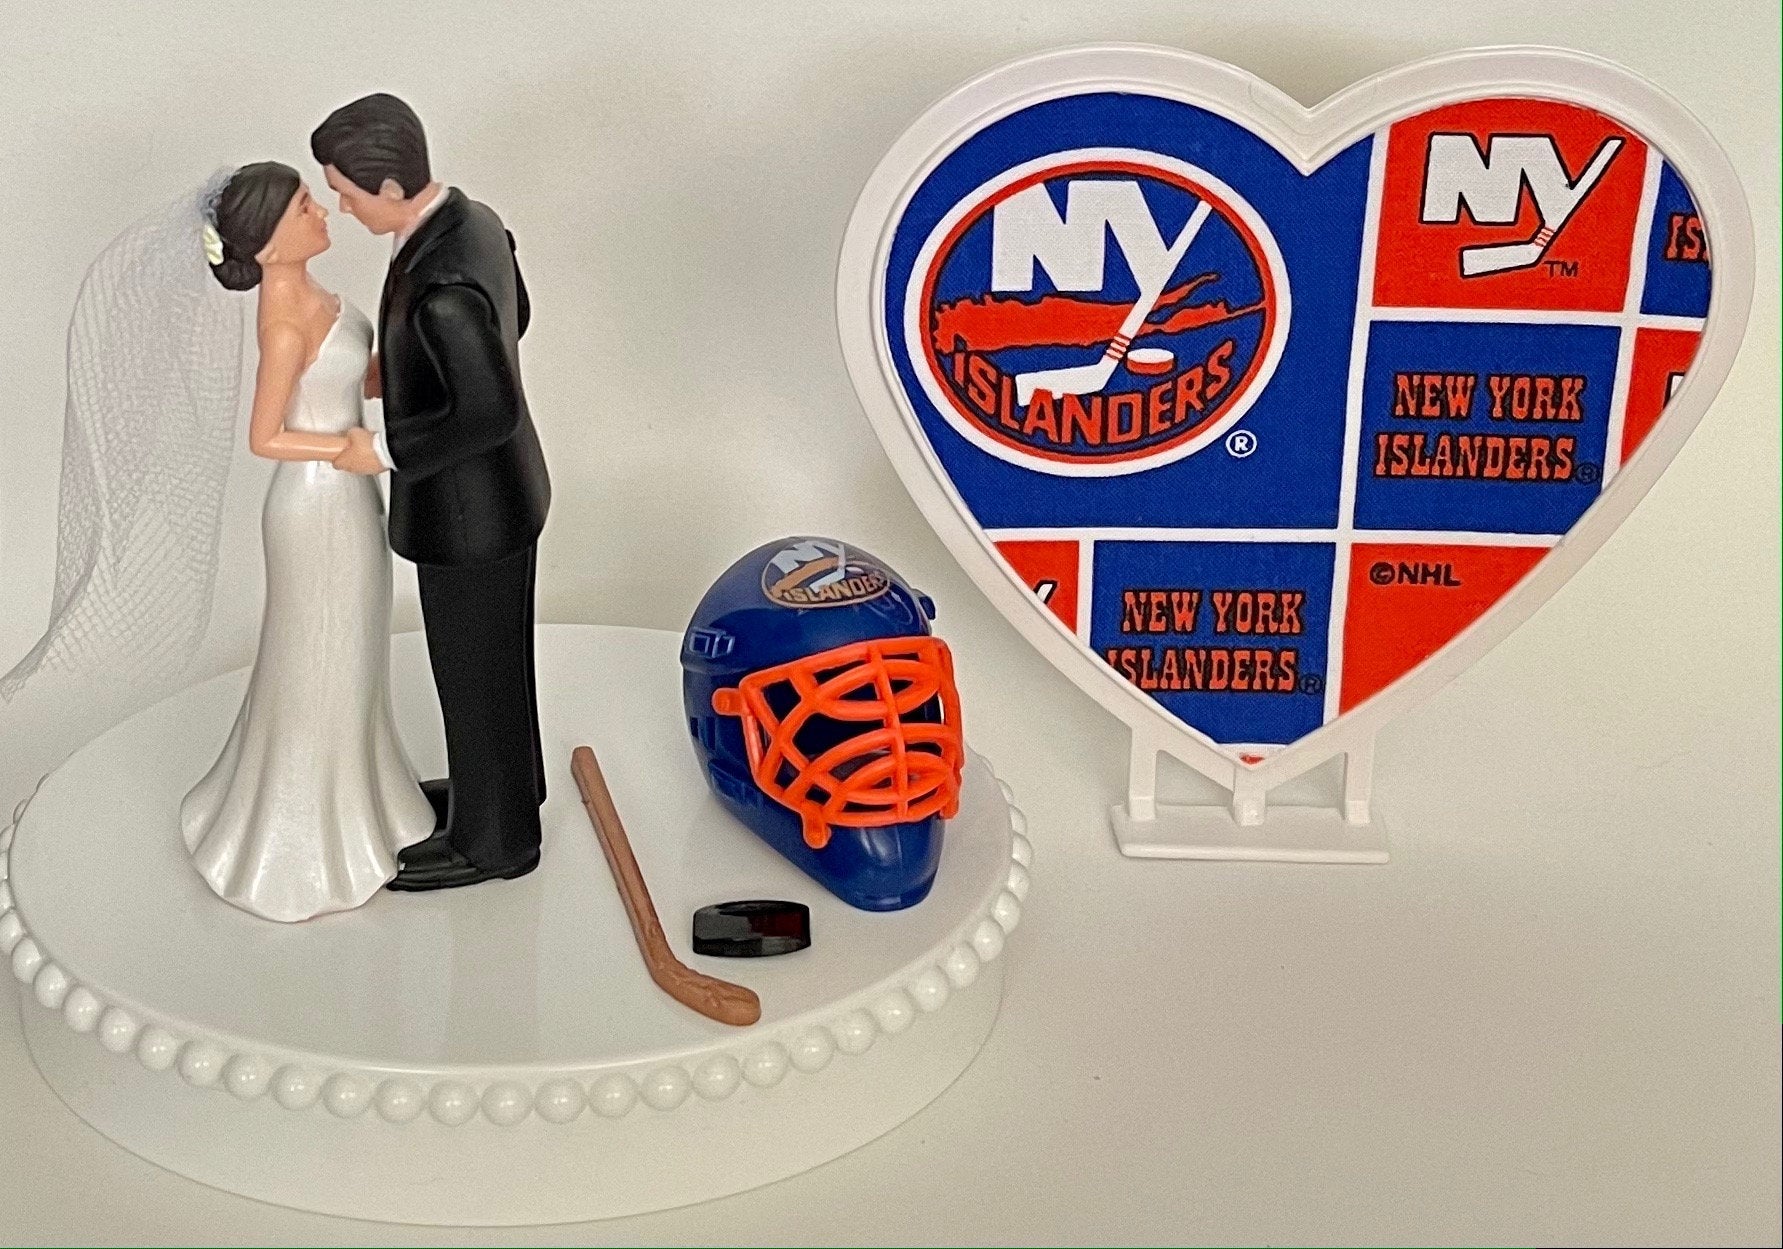 Wedding Cake Topper New York Islanders Hockey Themed Pretty Short-Haired Bride and Groom Unique Sports Fans Groom's Cake Top Reception Gift